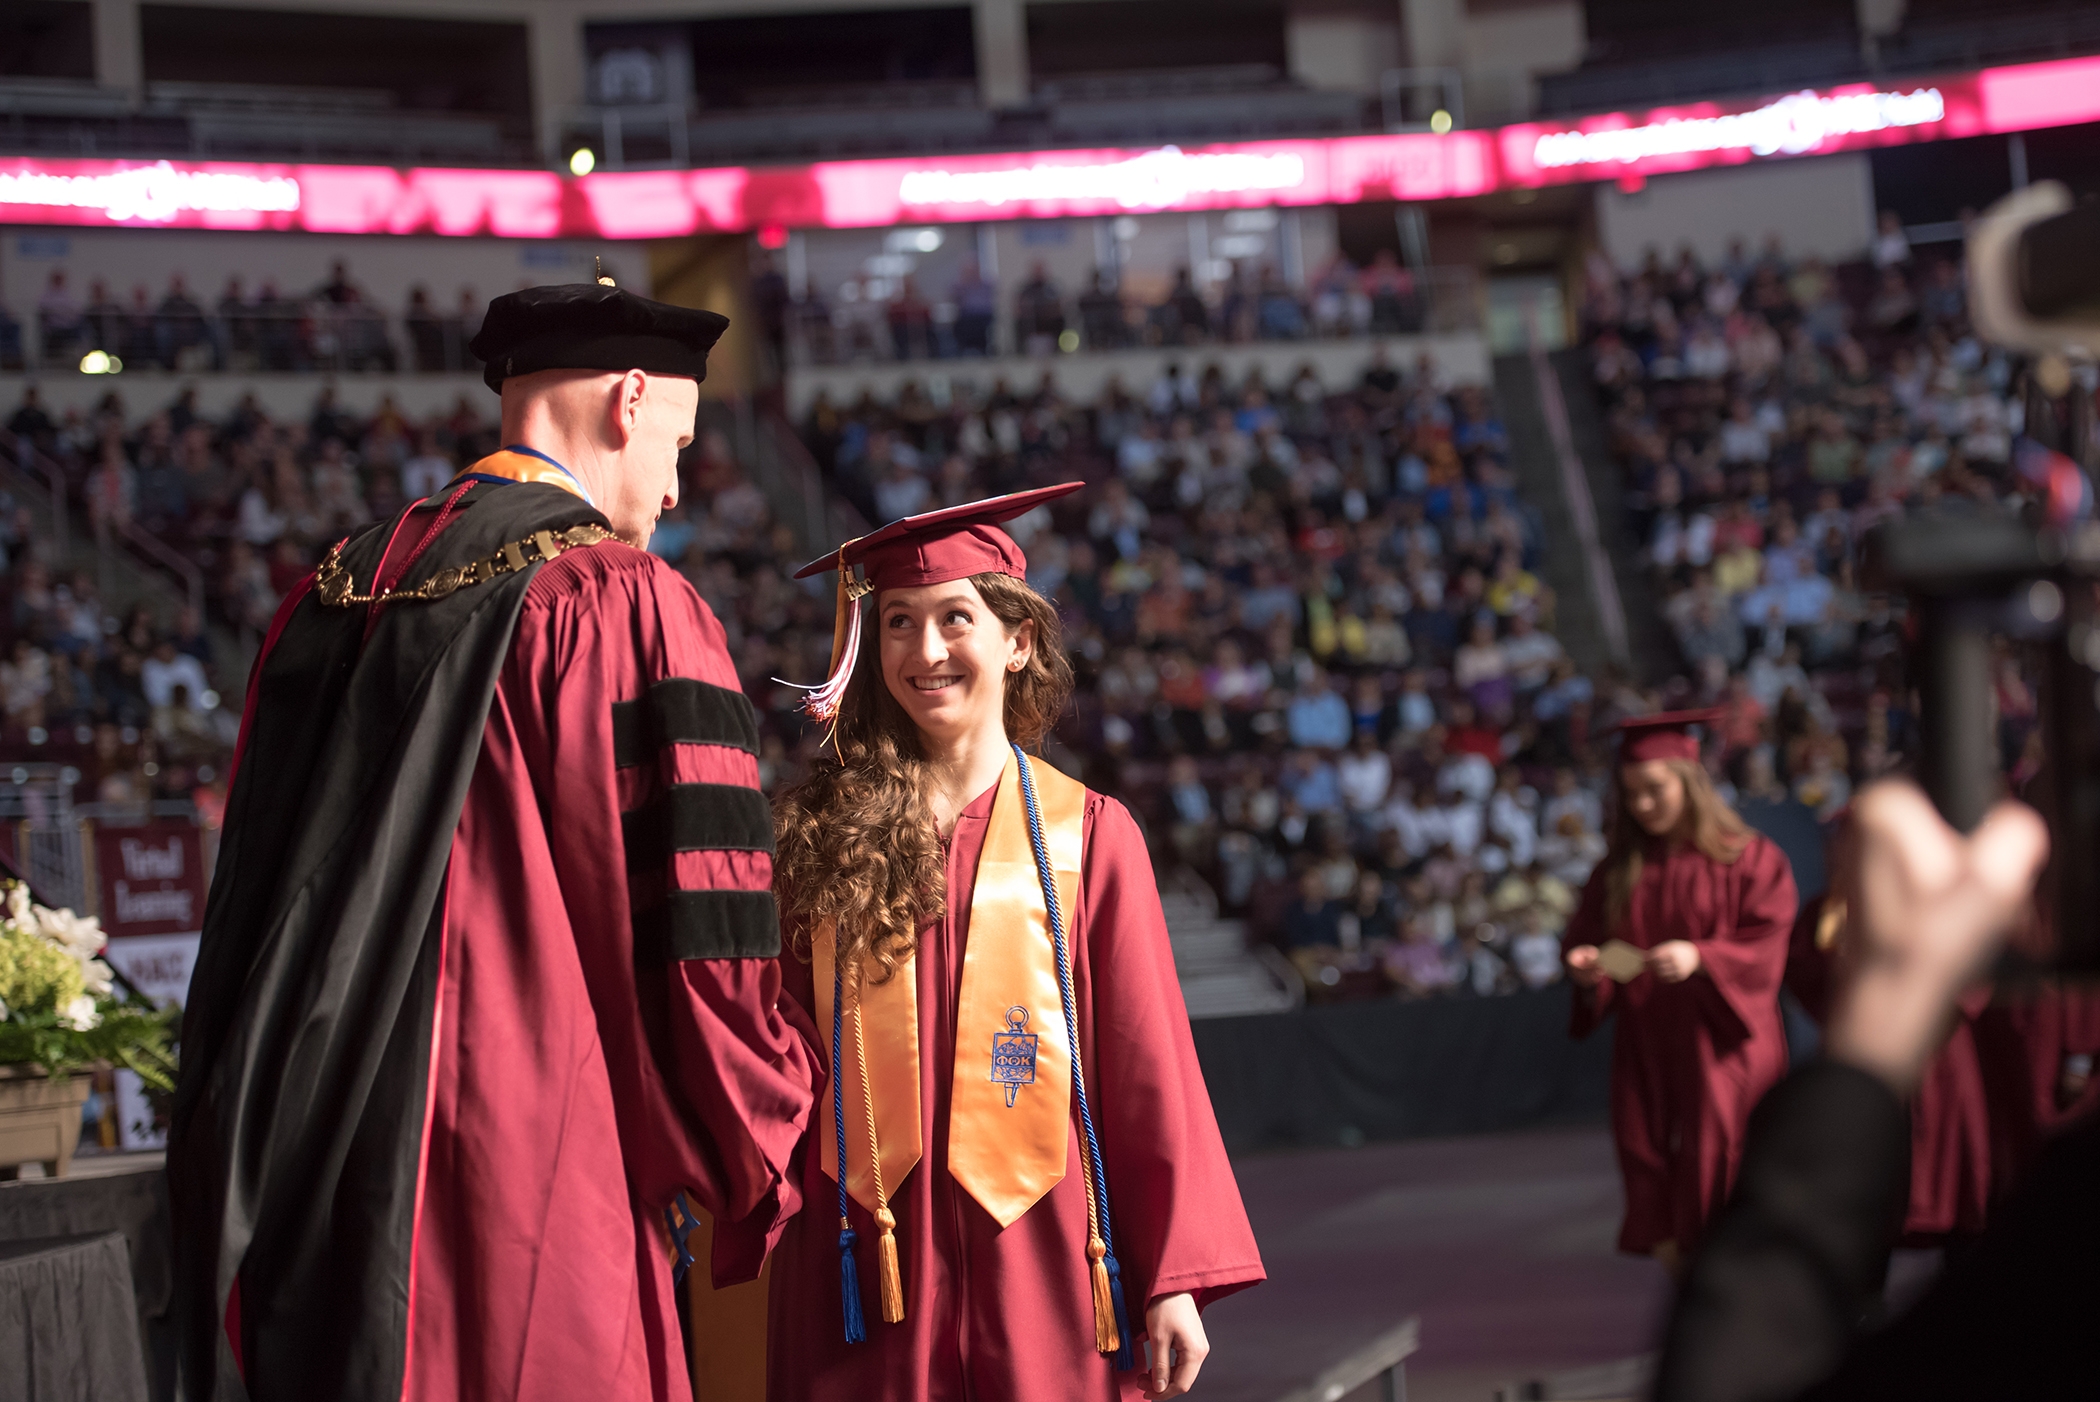 More than 1,020 Students Graduate from HACC in Spring 2019